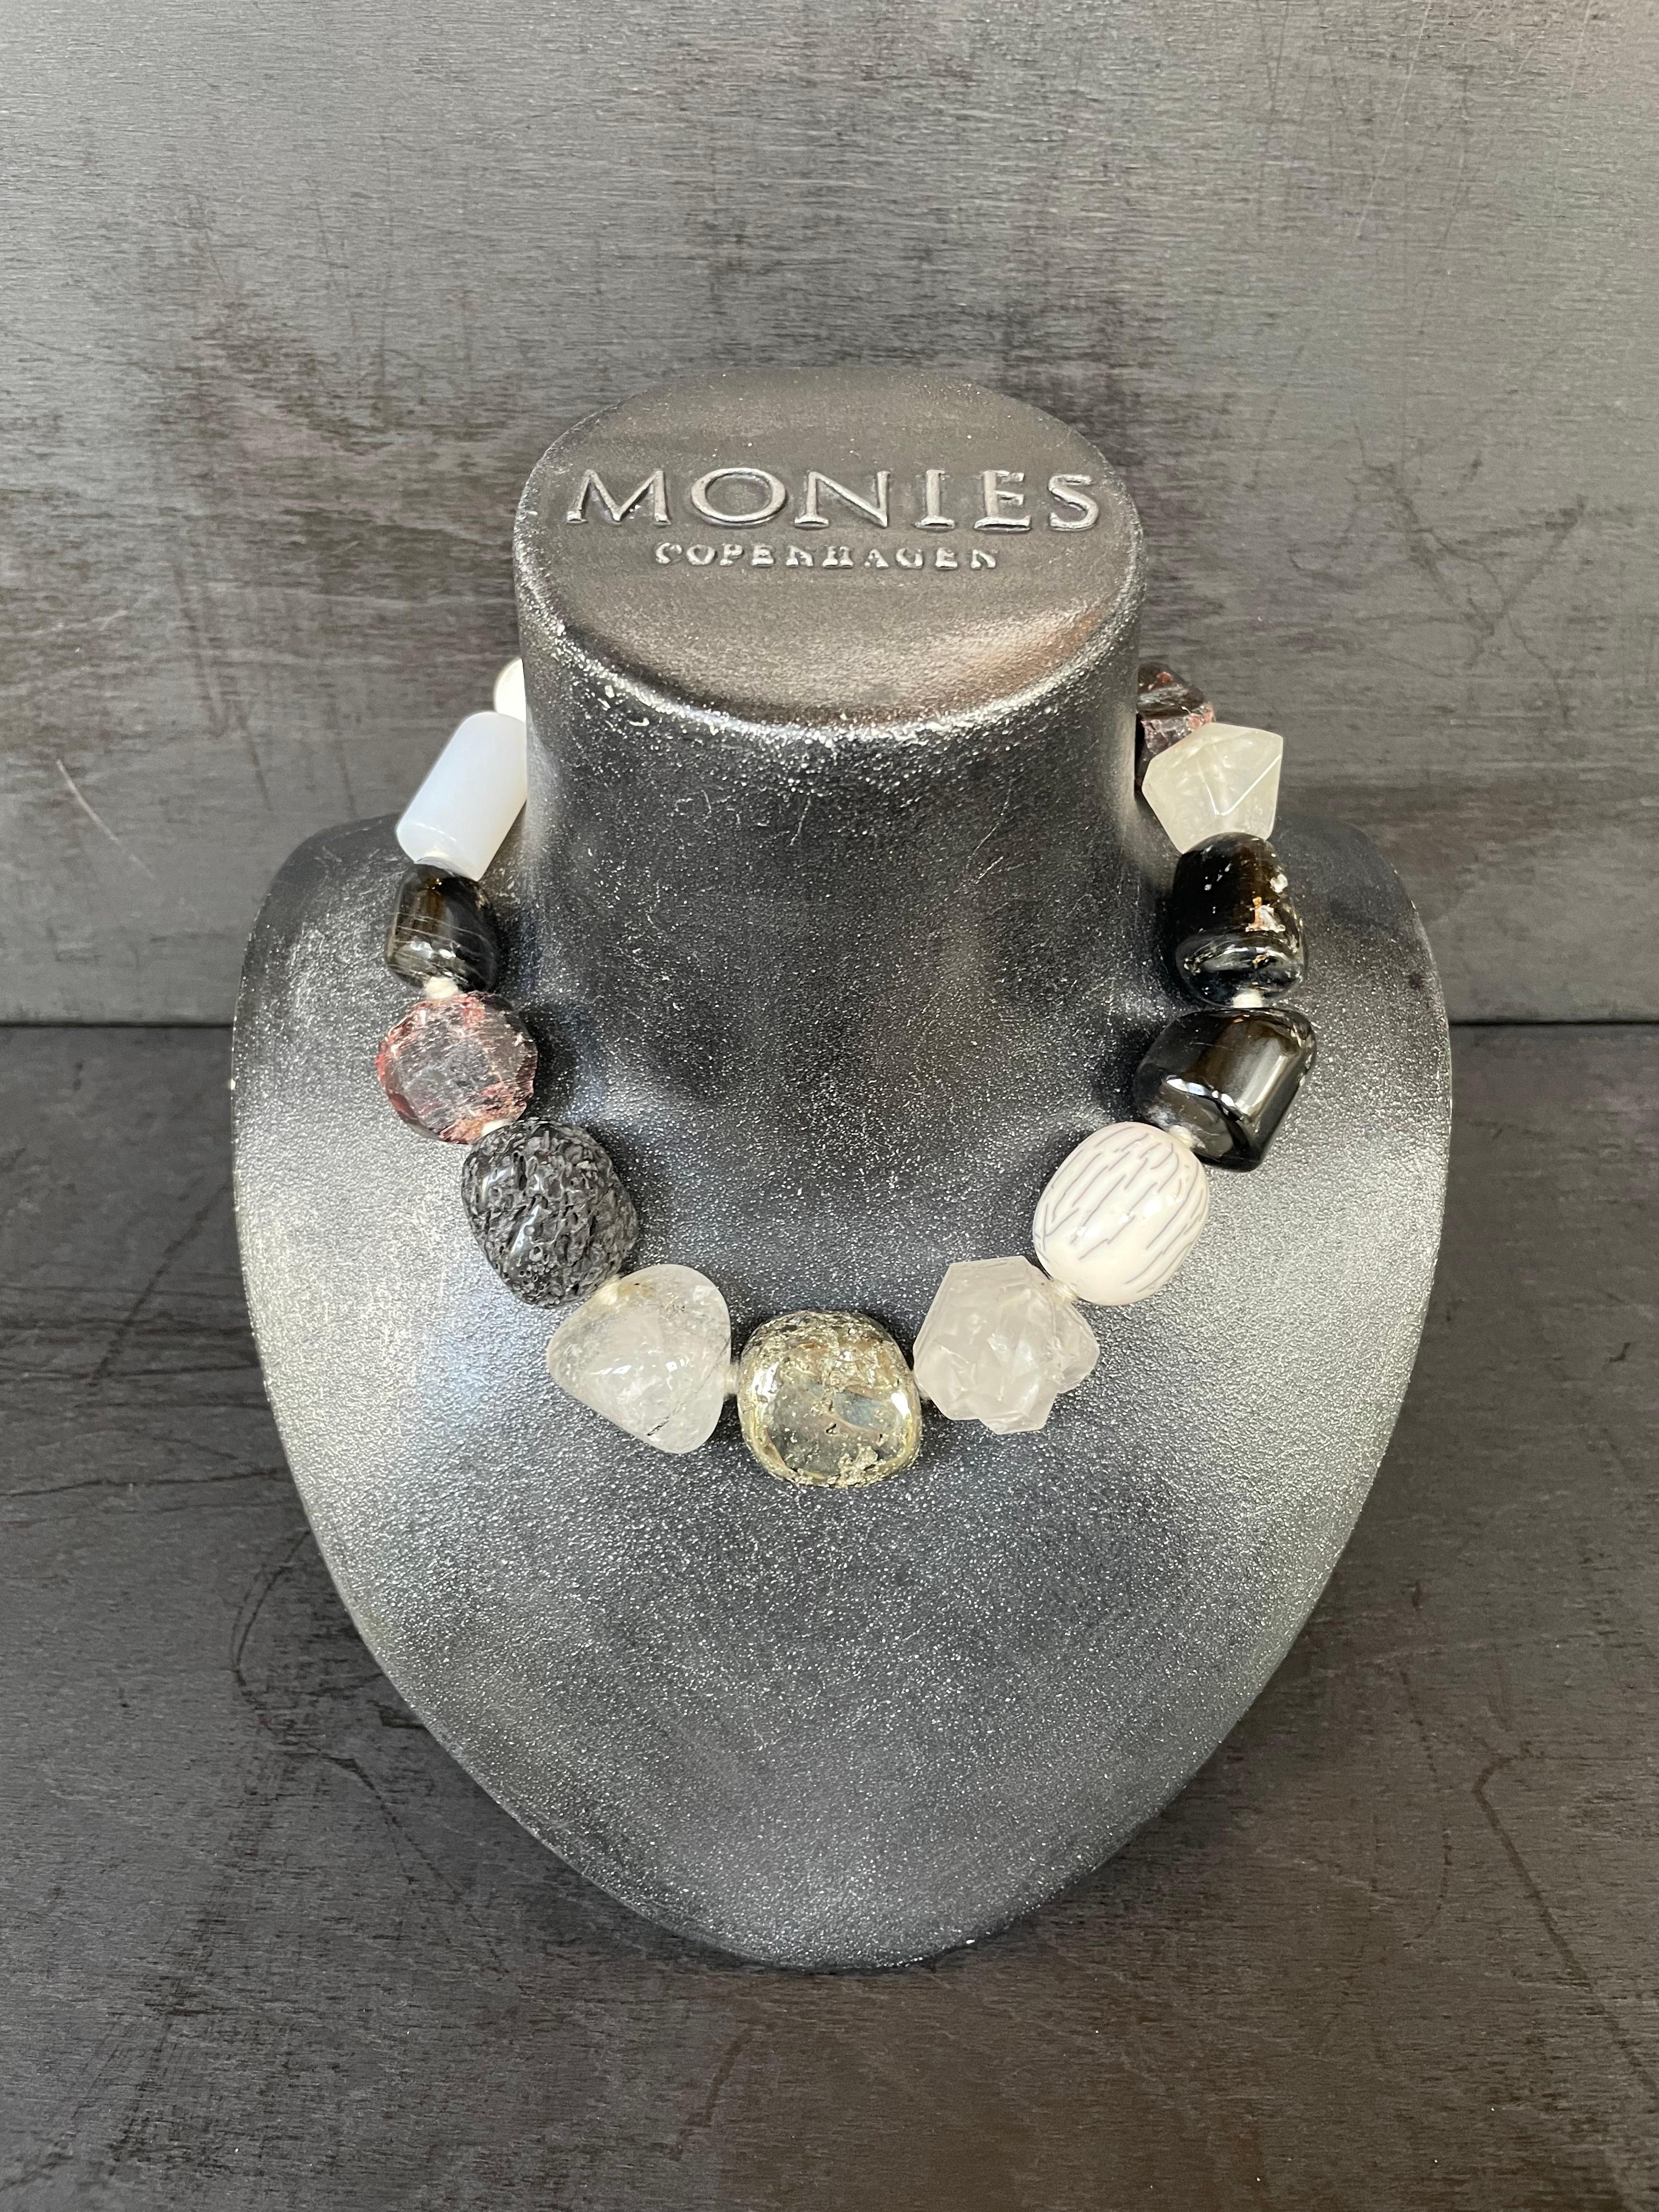 One-of-a-kind statement necklace from the Danish jewellery brand, Monies.
Made in Dolomite, Horn, Tourmaline, Lava Stone and Mountain Crystal with a leather clasp.

Handcrafted in the Monies Atelier in Copenhagen.